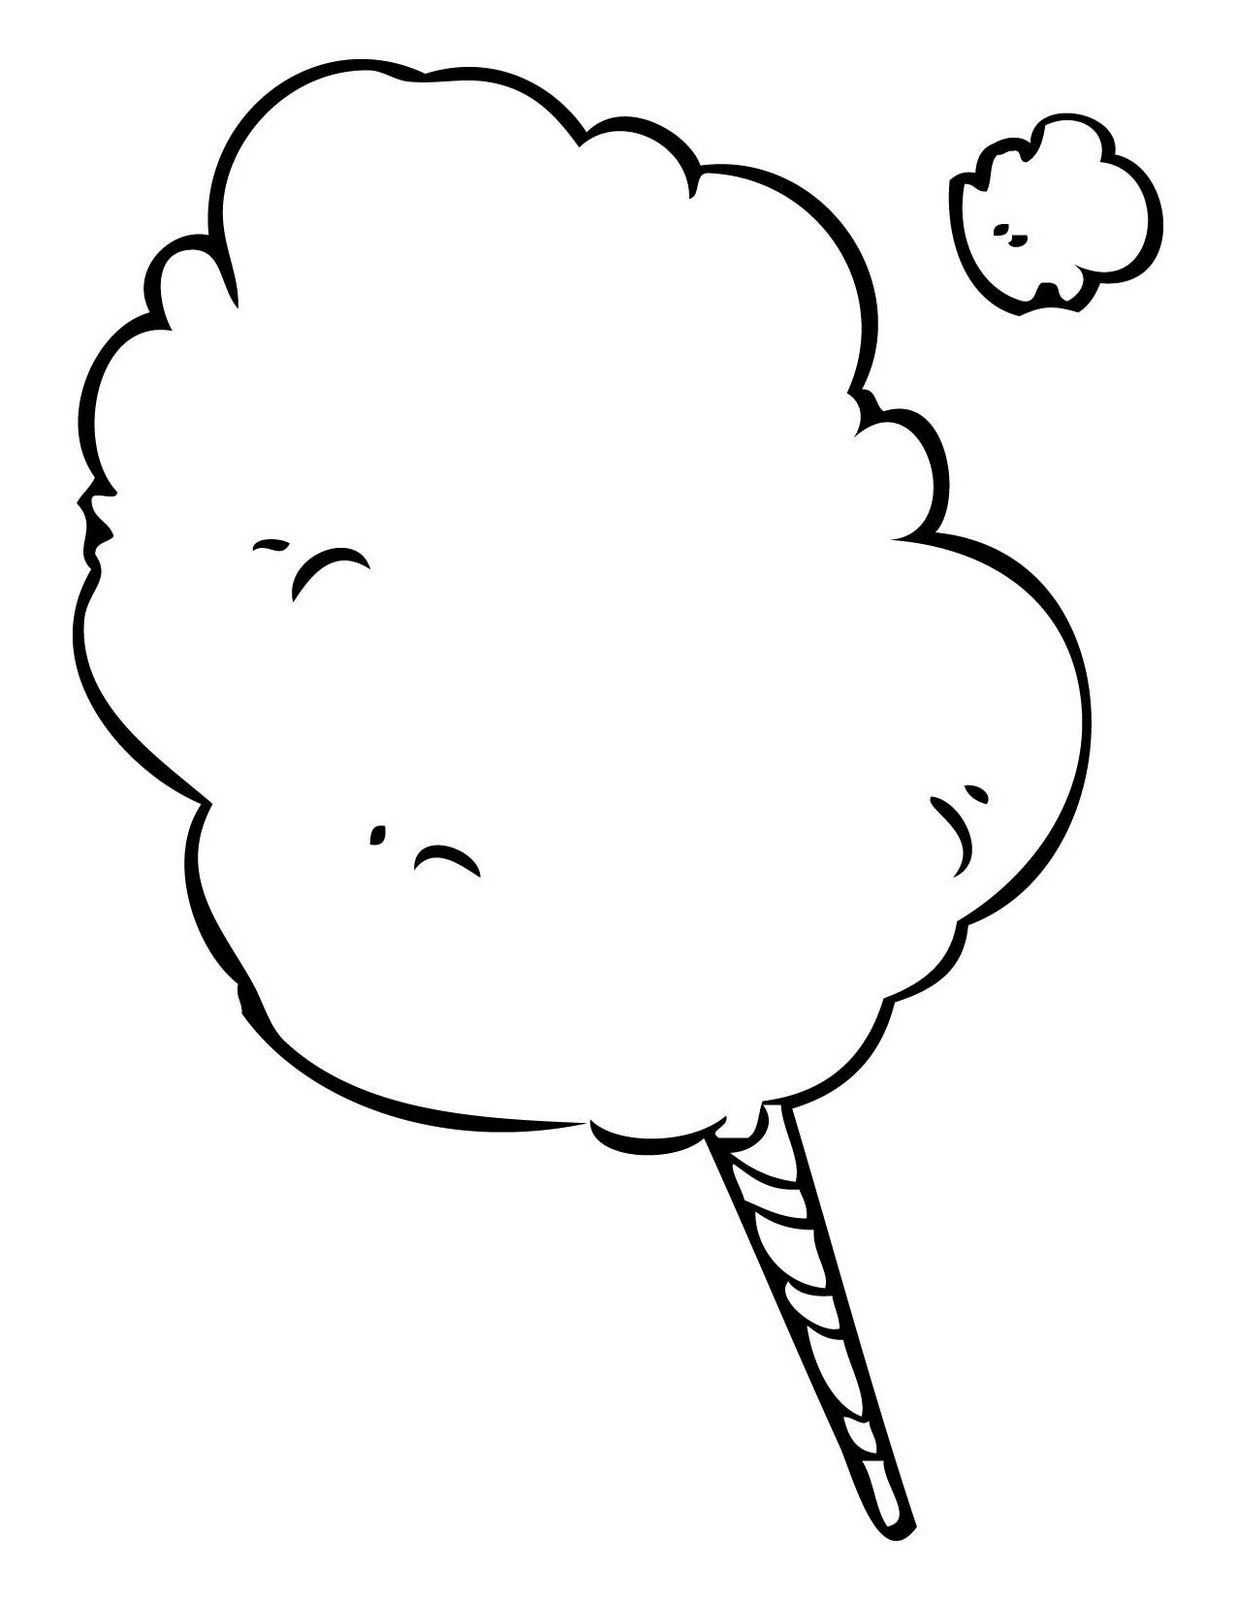 Cotton candy clipart black and white